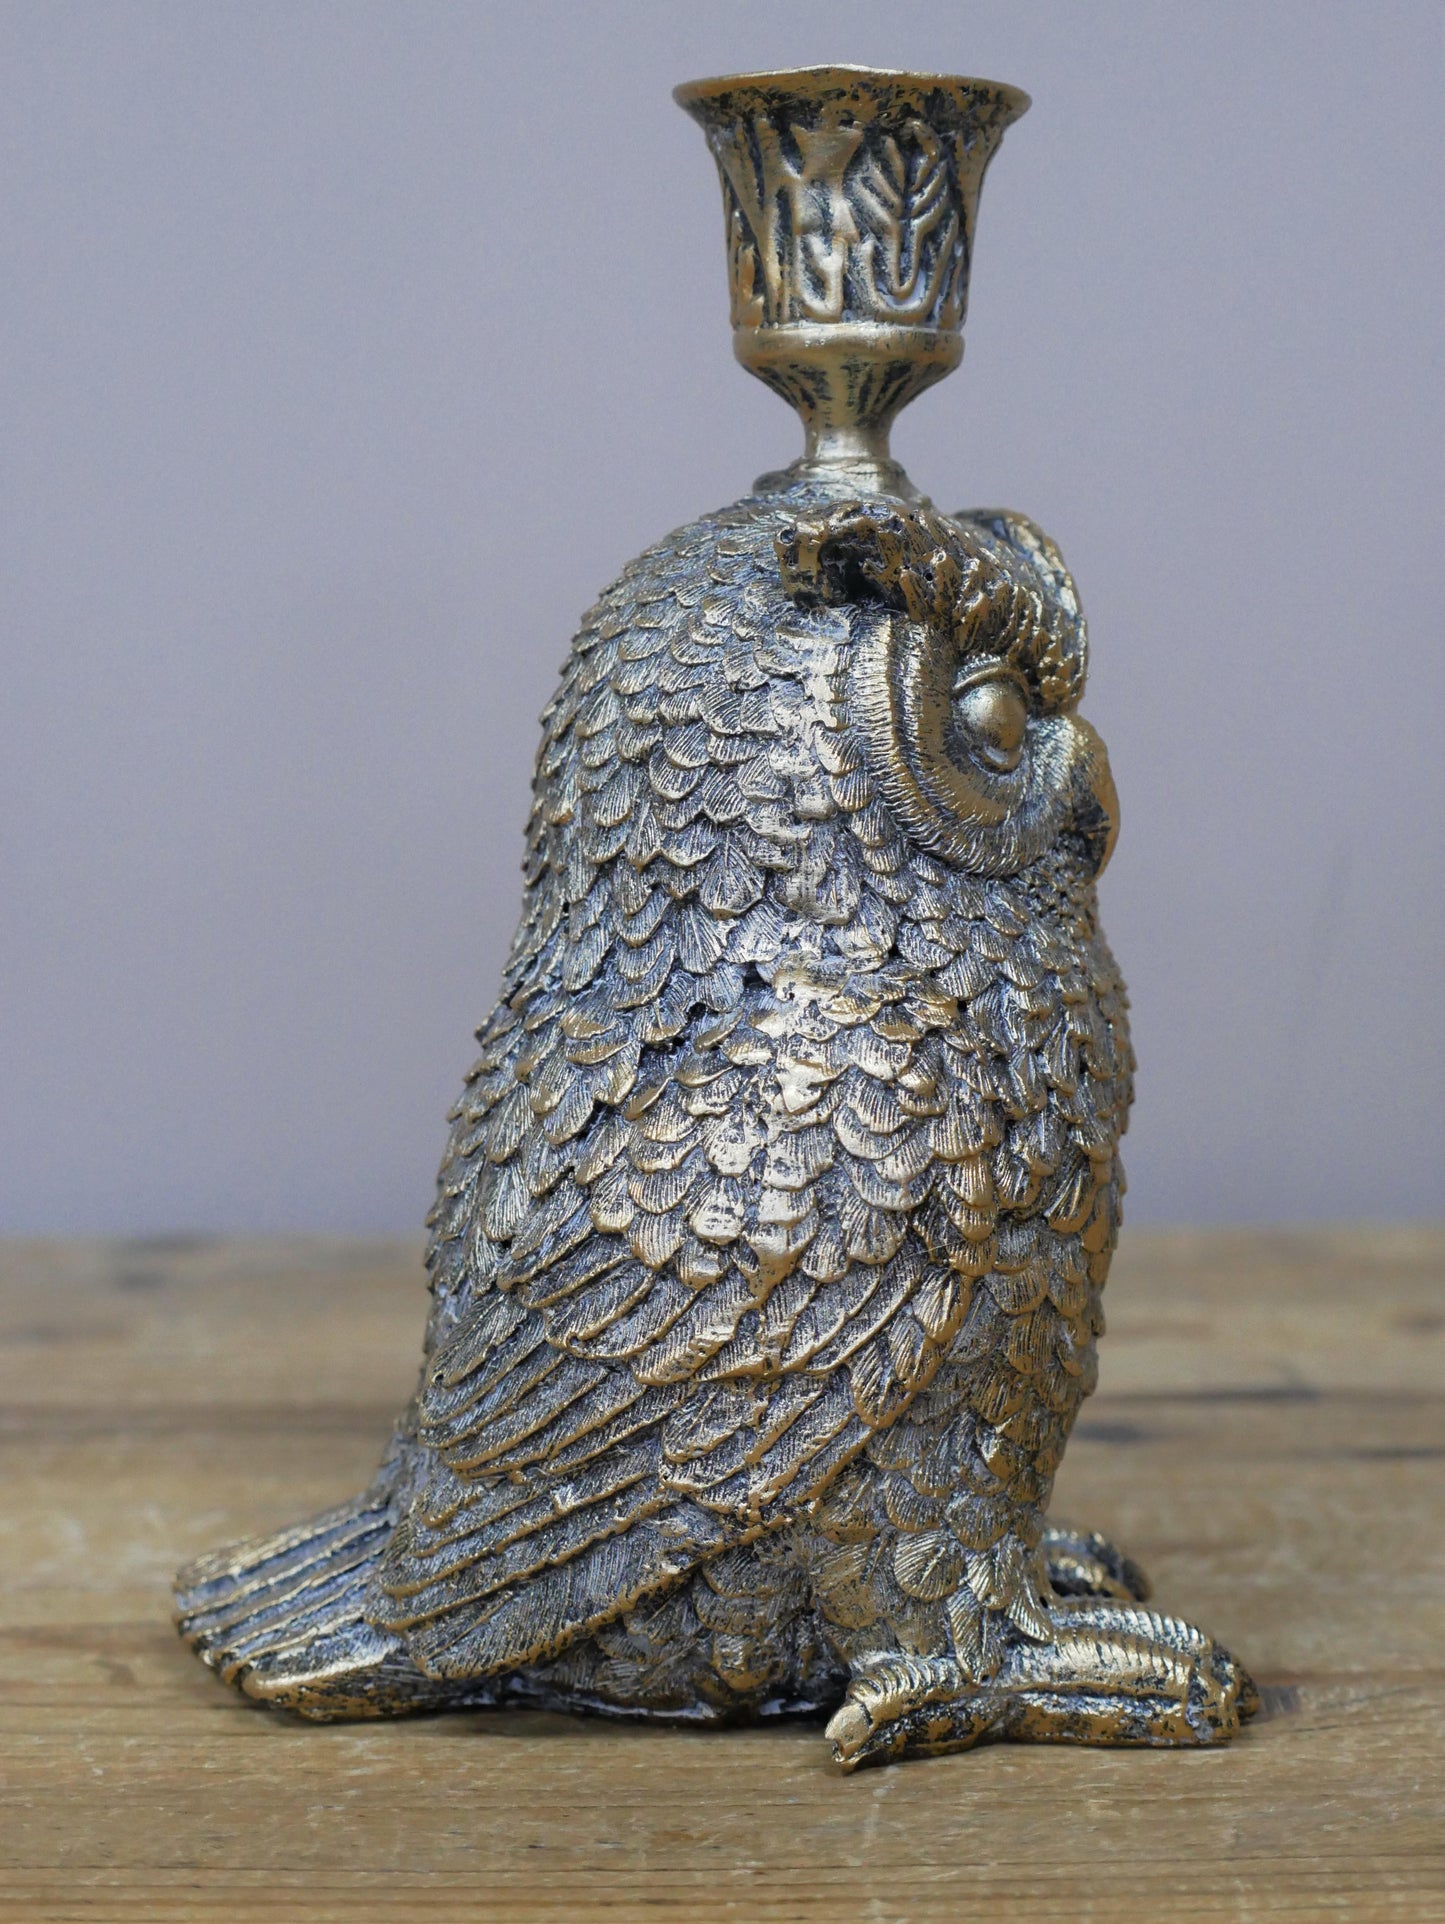 Owl Candle Holder